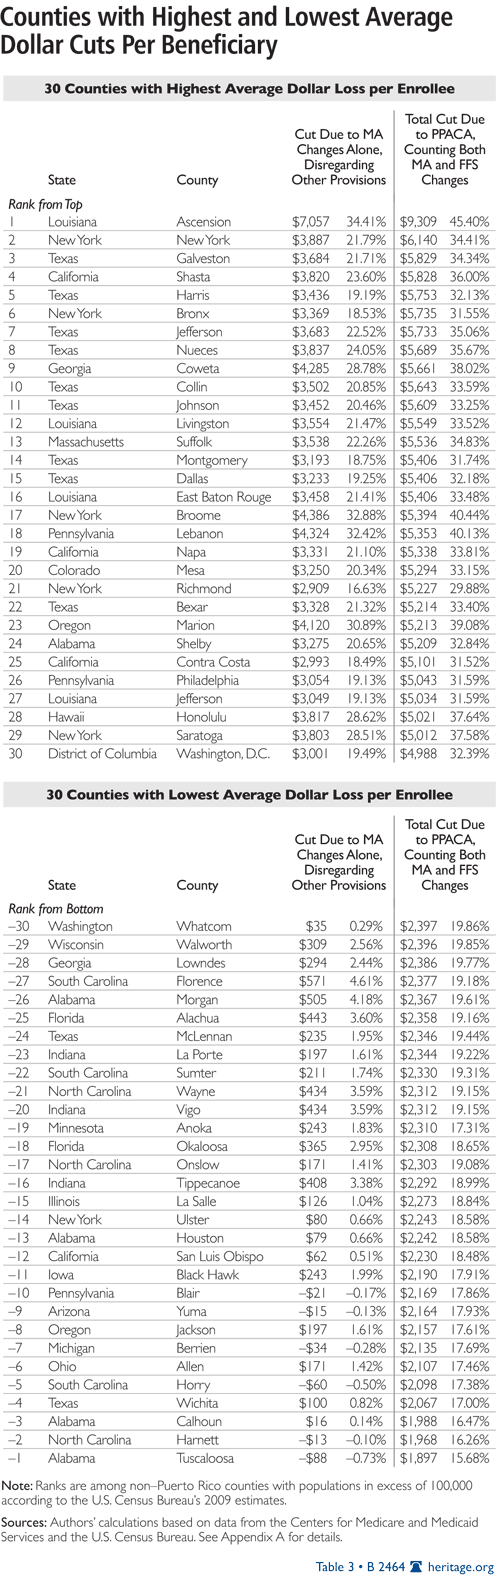 Counties with the Highest and Lowest Average Dollar Cuts Per Beneficiary